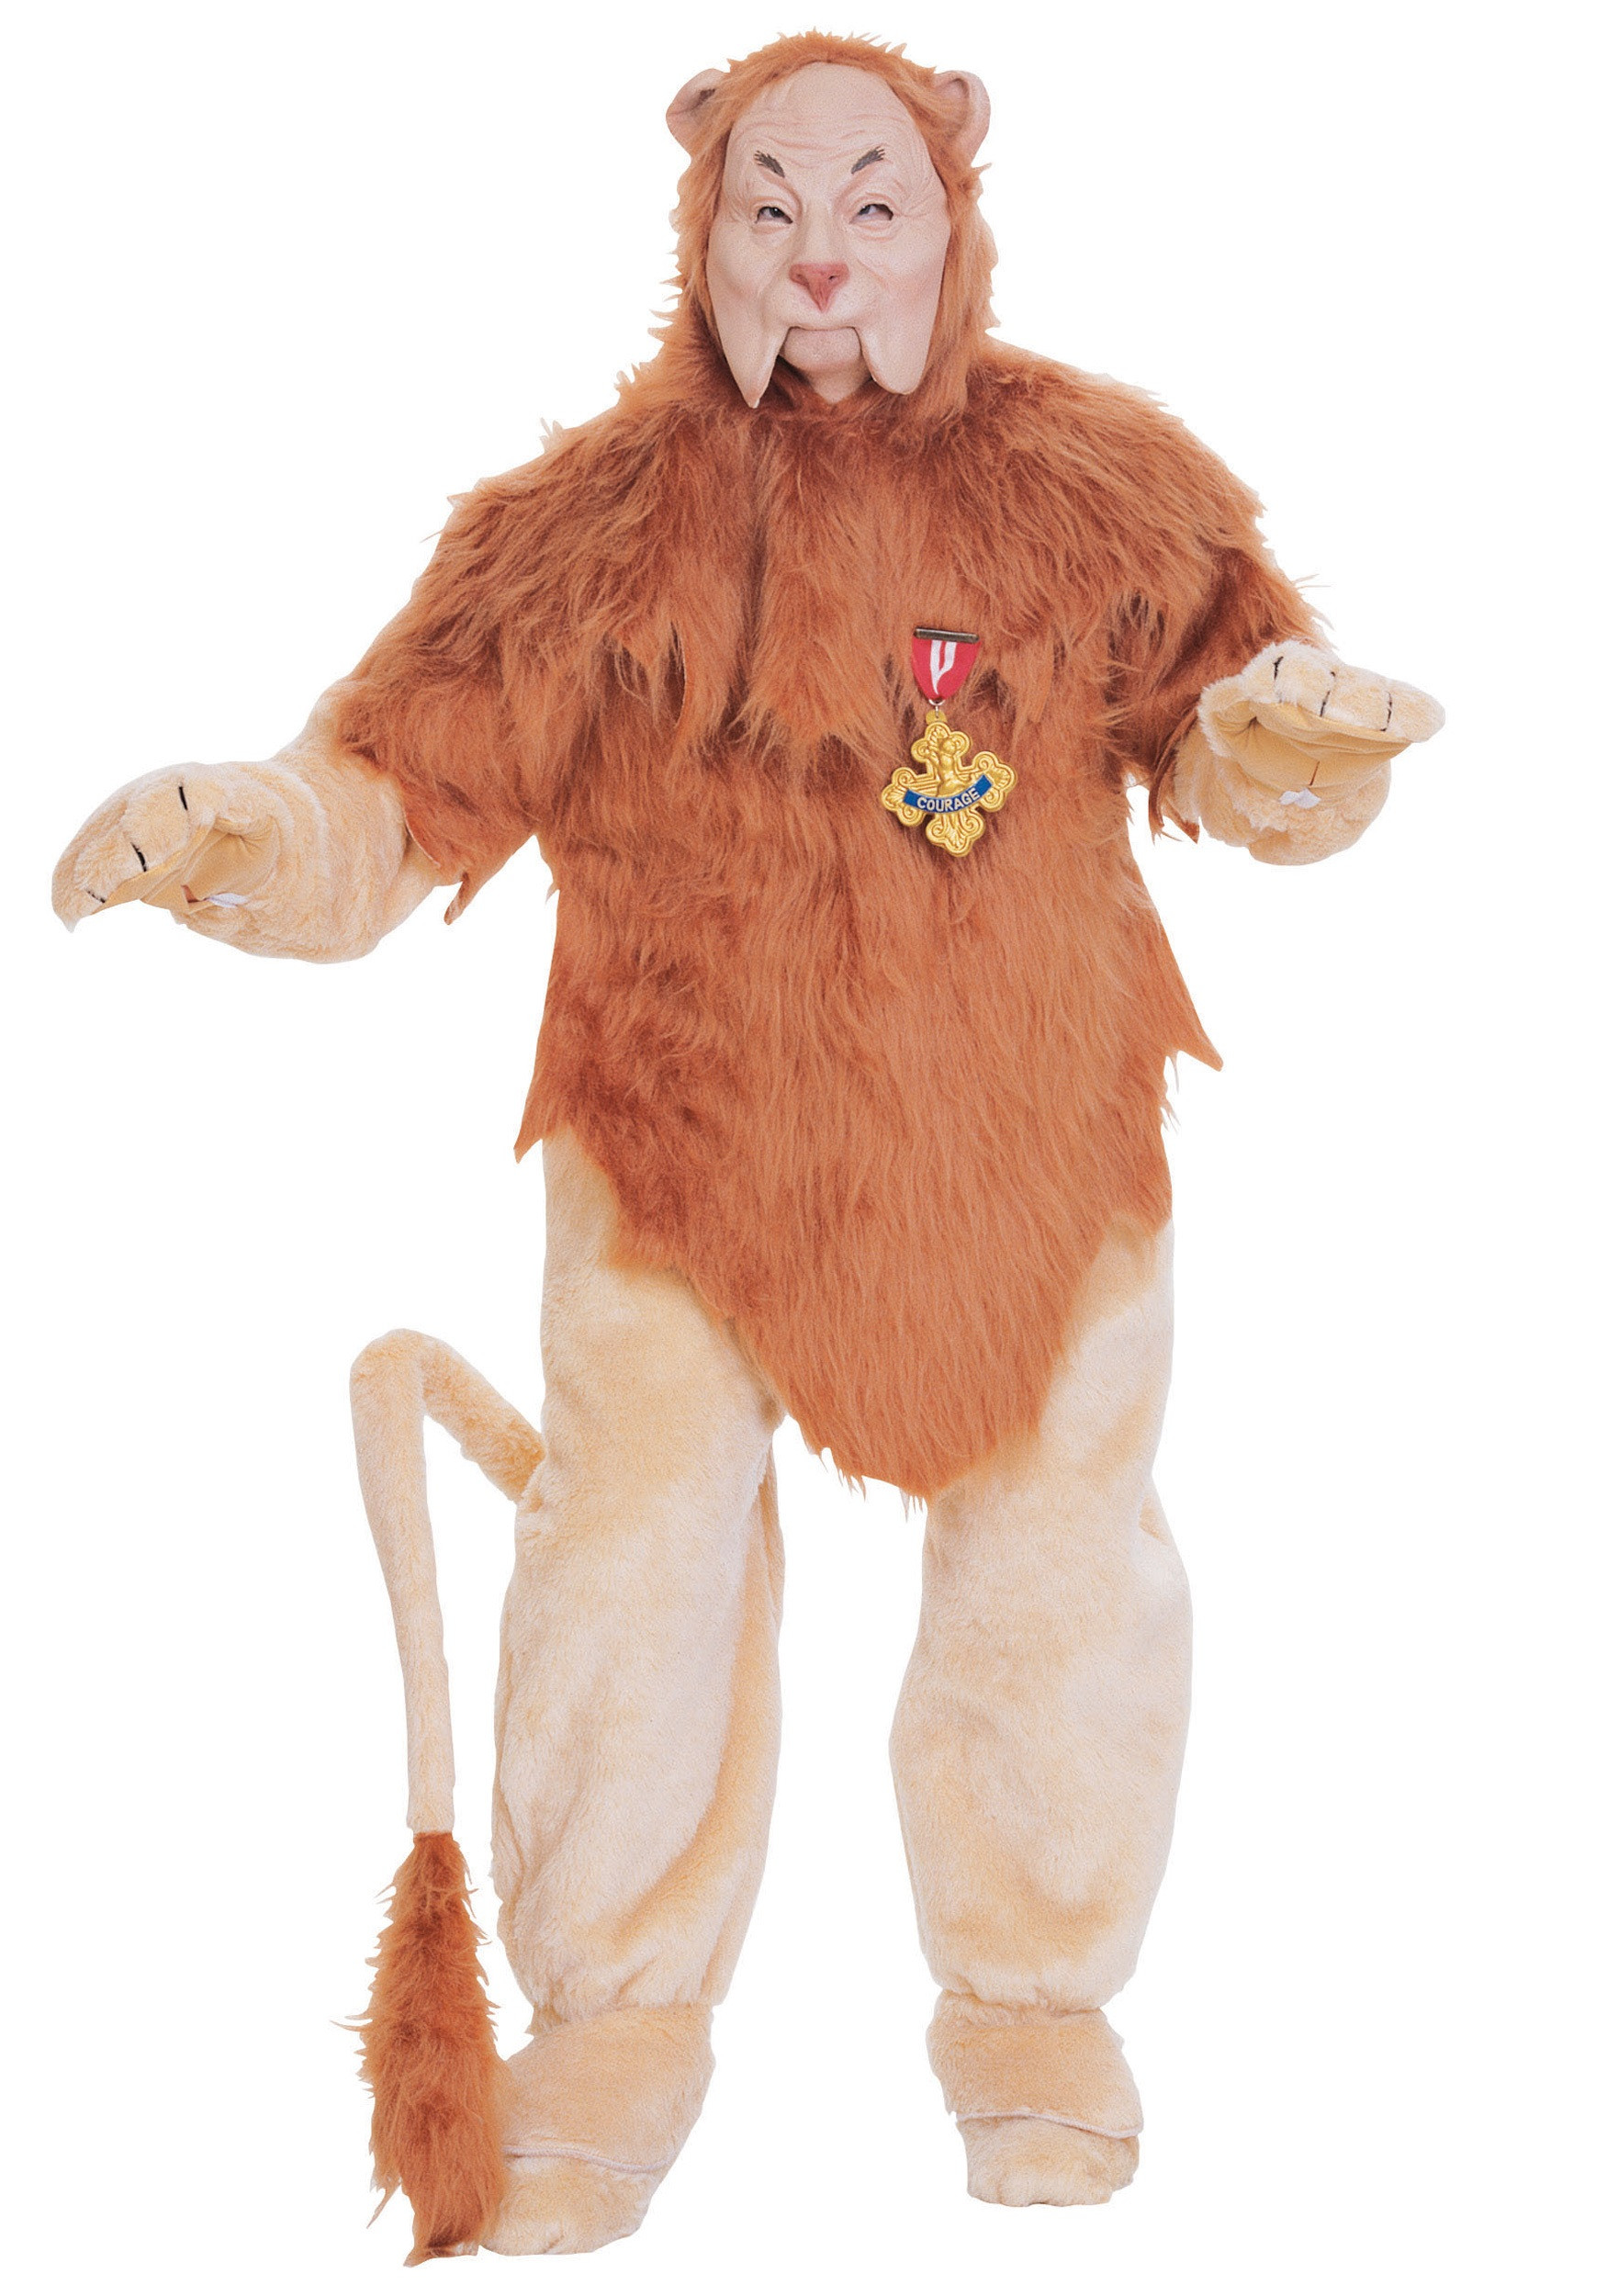 DIY Lion Costume Wizard Of Oz
 Deluxe Cowardly Lion Costume